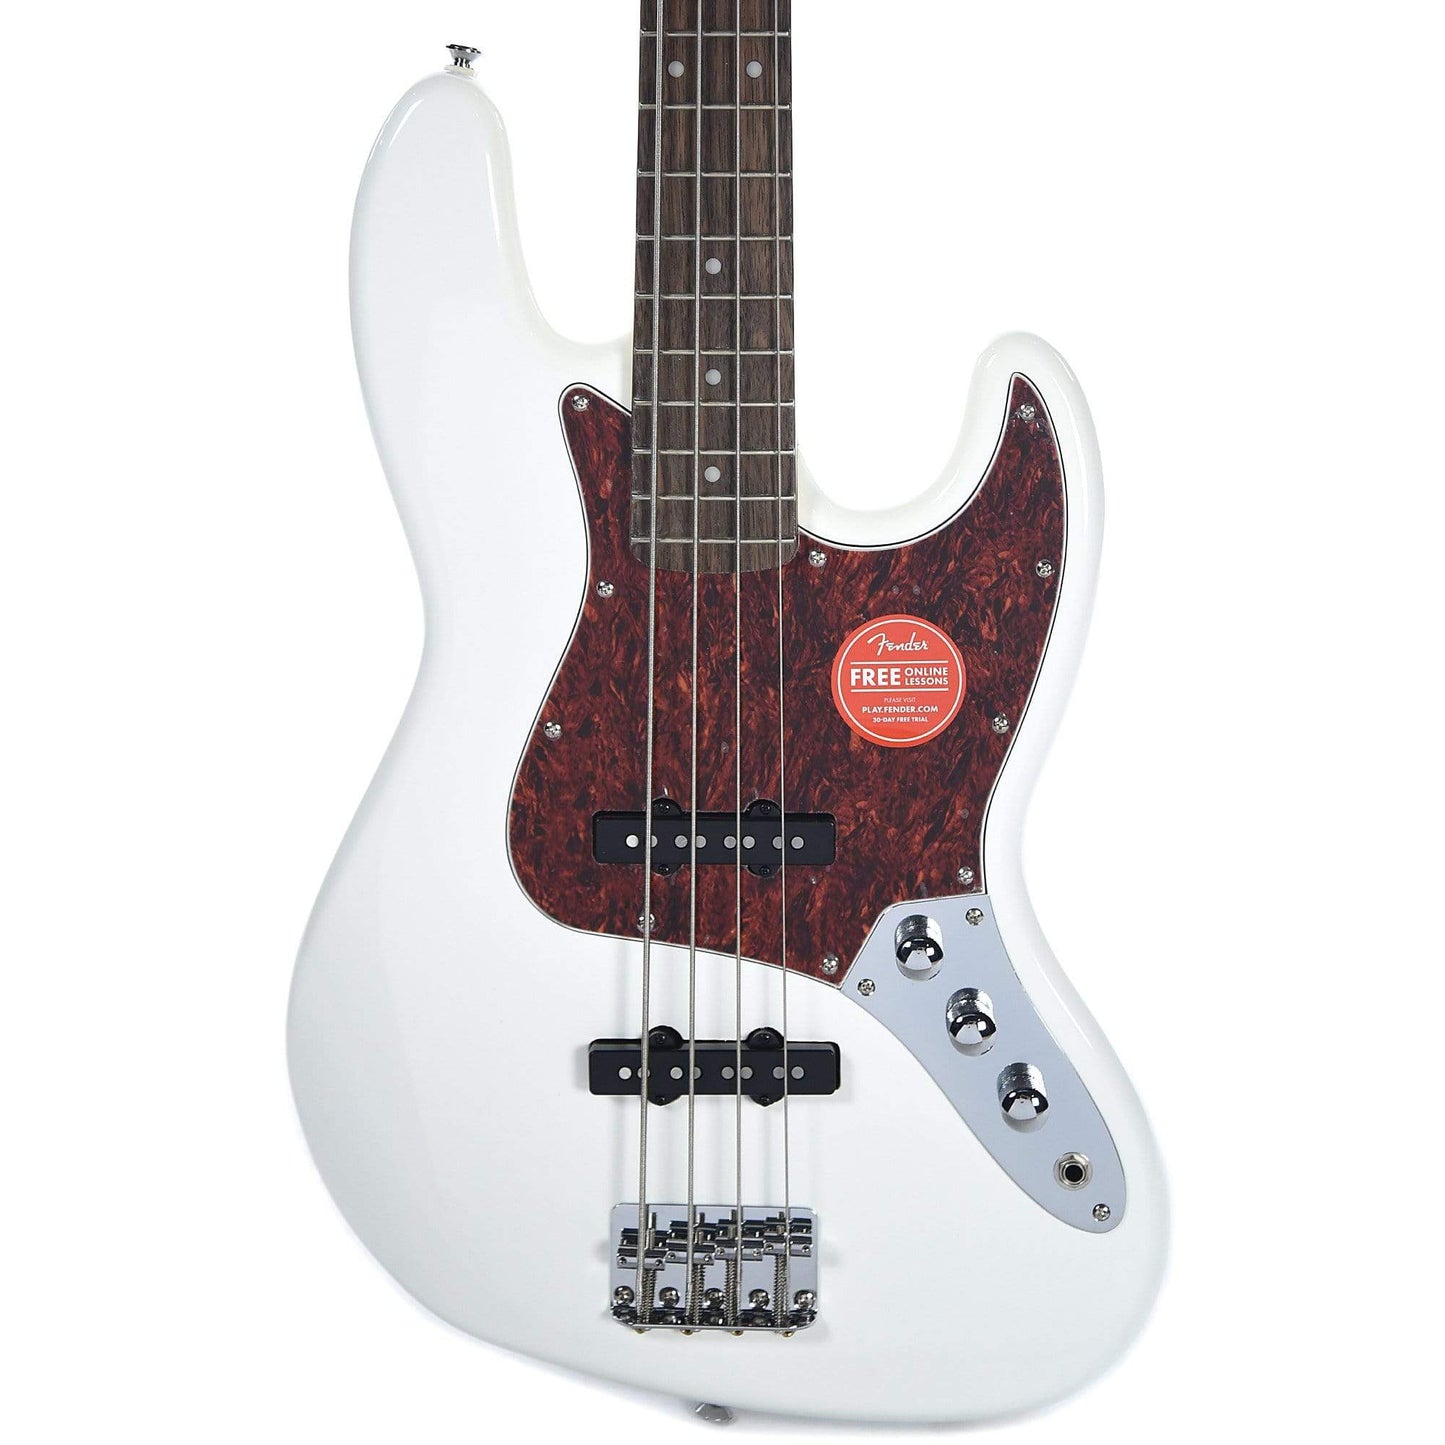 Squier Vintage Modified Jazz Bass Olympic White w/Fender Gig Bag, Stand, Cable, Tuner, Picks and Strings Bass Guitars / 4-String